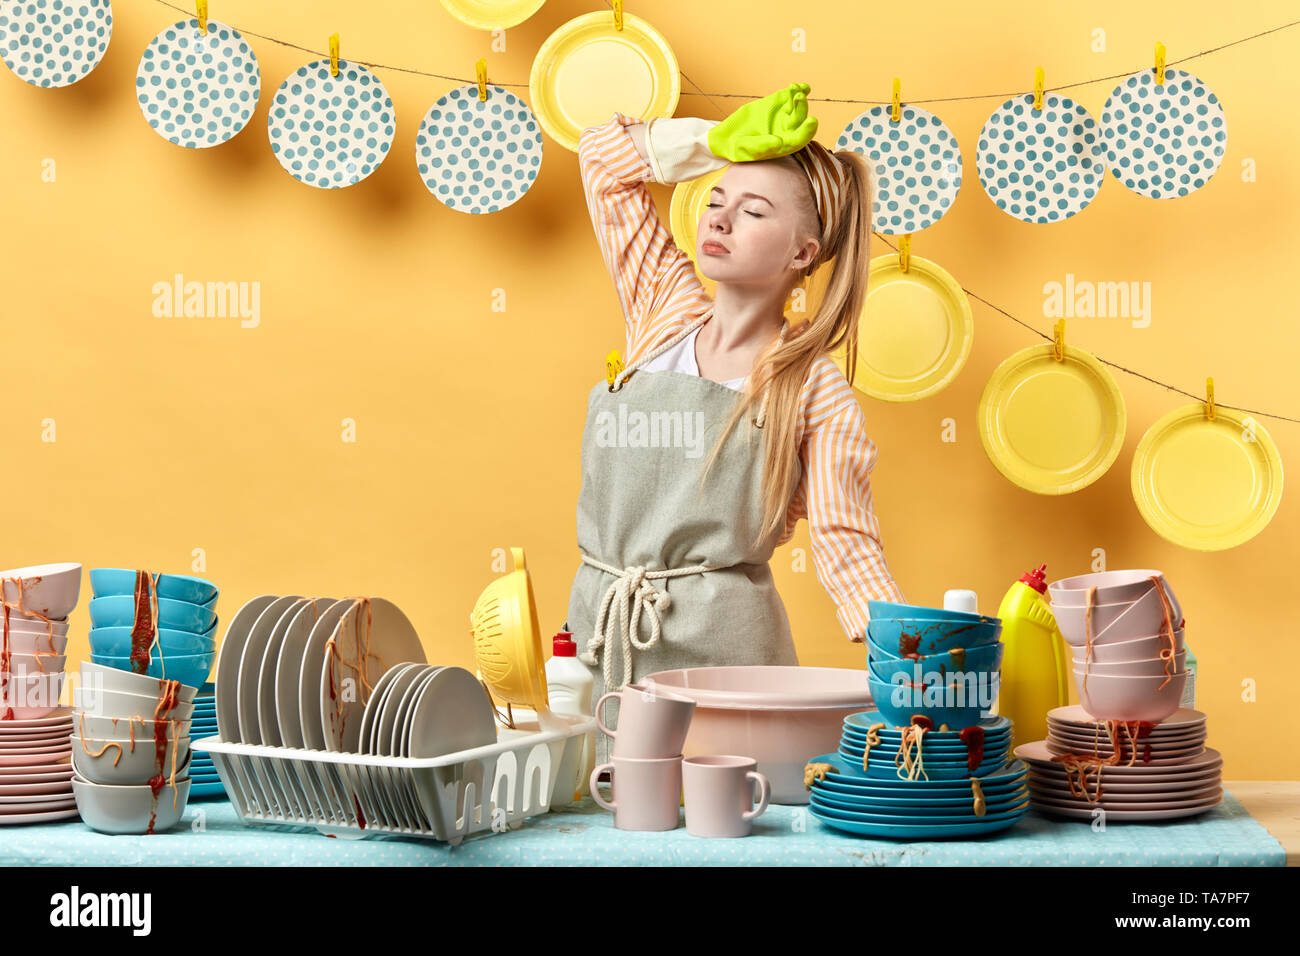 housewife holding her head, having headache, girl having a break, having a rest while washing the dishes in the kitchen with yellow wall, housewife ov Stock Photo